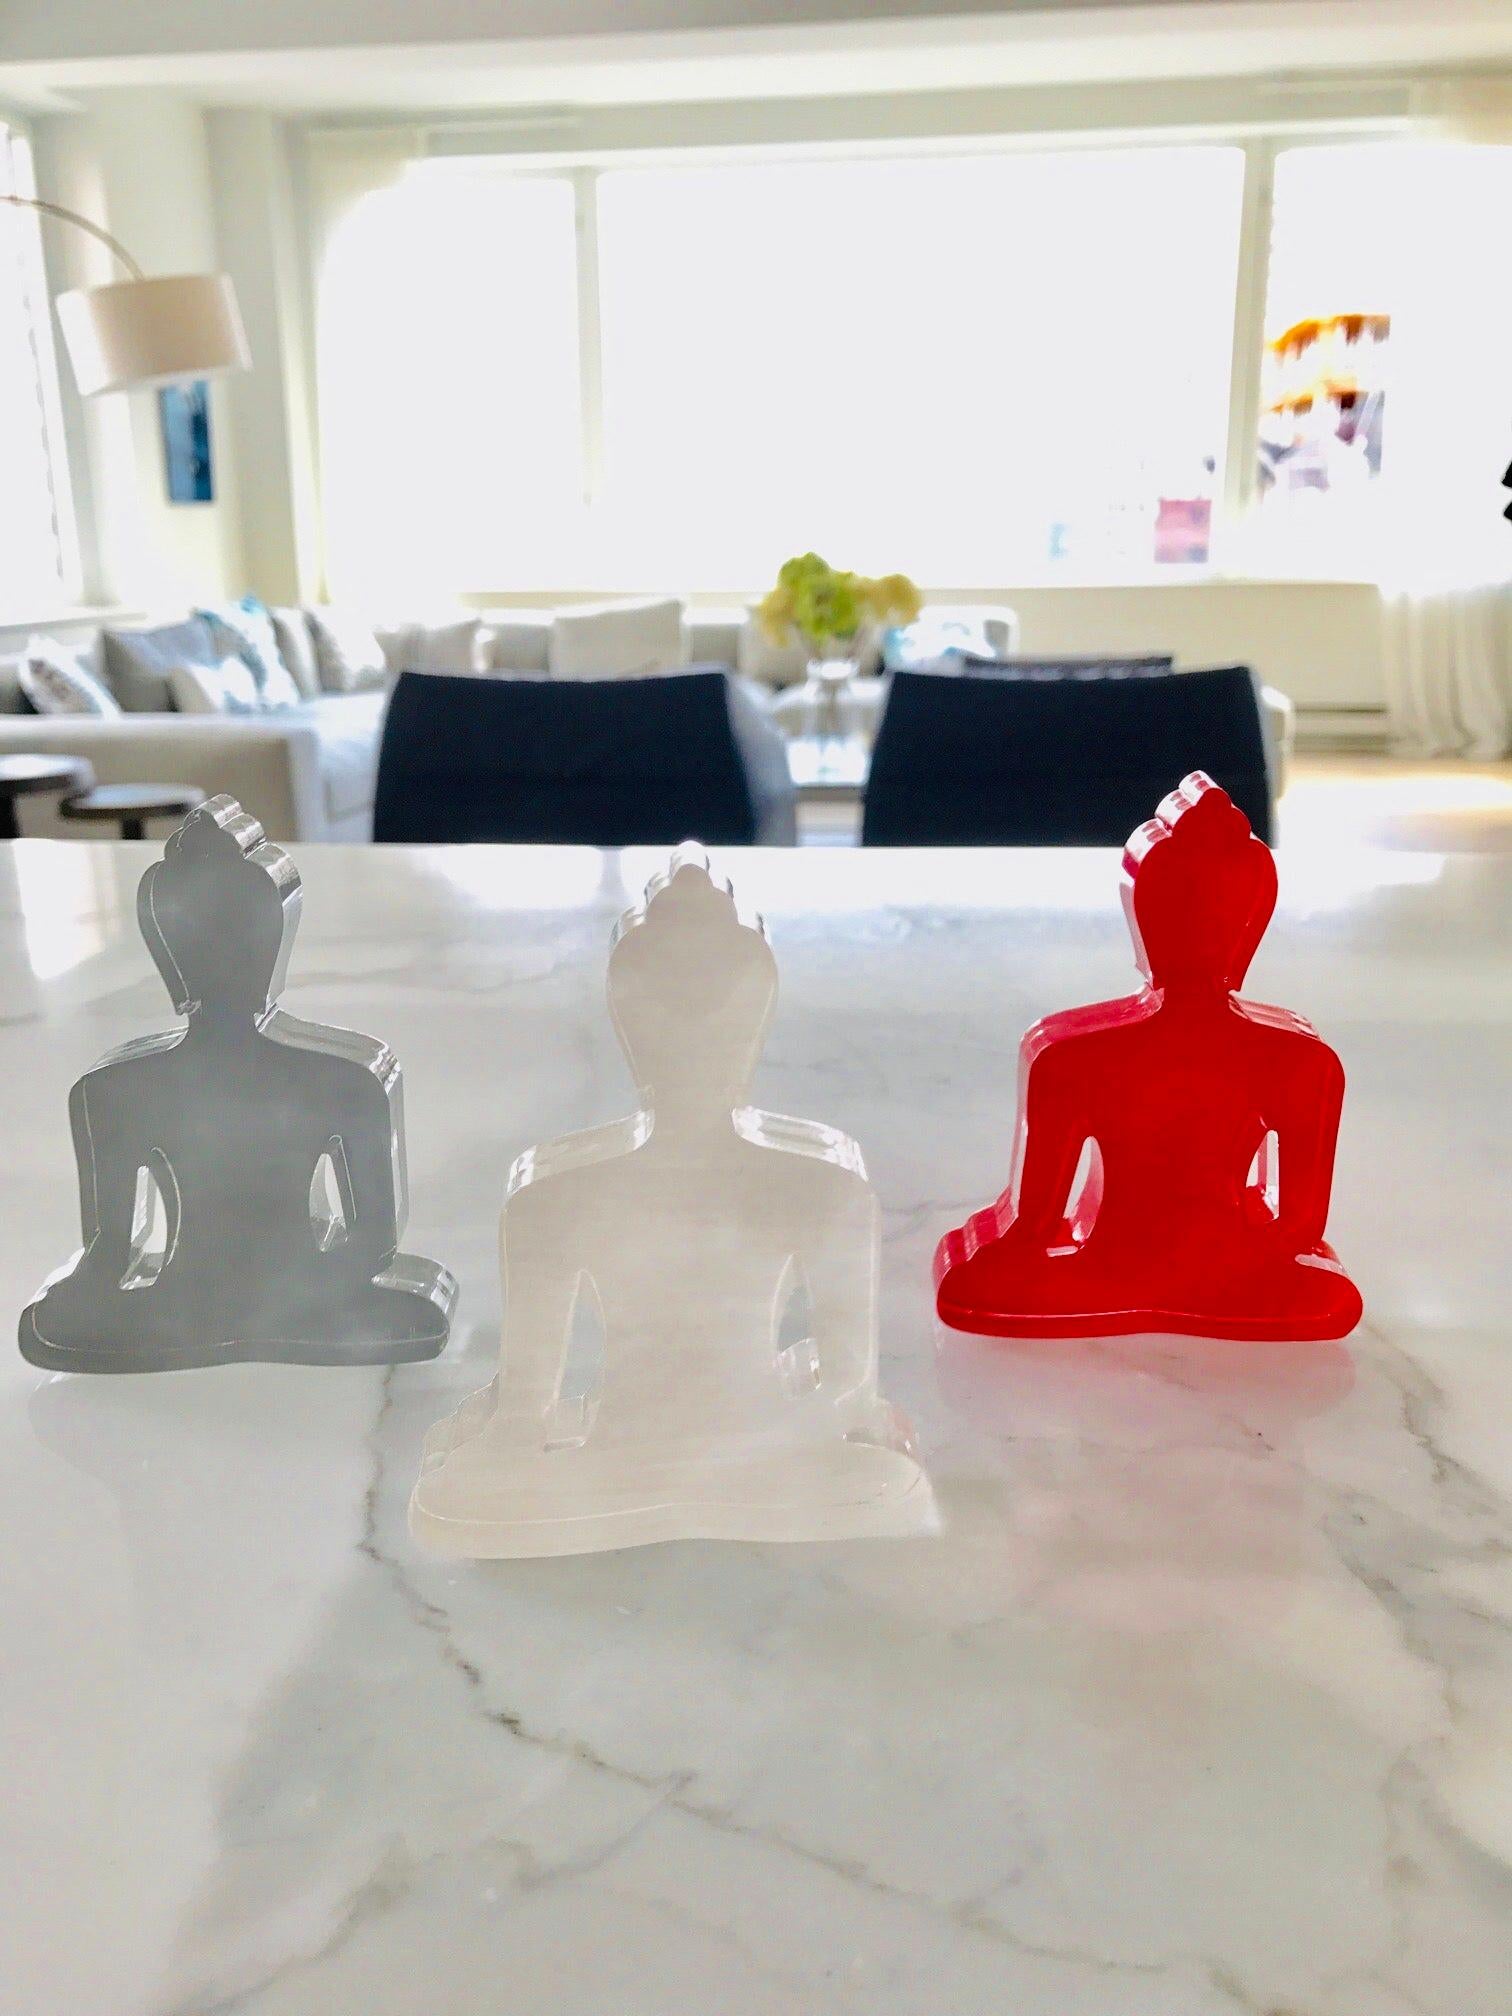 Unknown Figurative Sculpture - Three Buddhas - White, Red and Grey Buddha sculptures